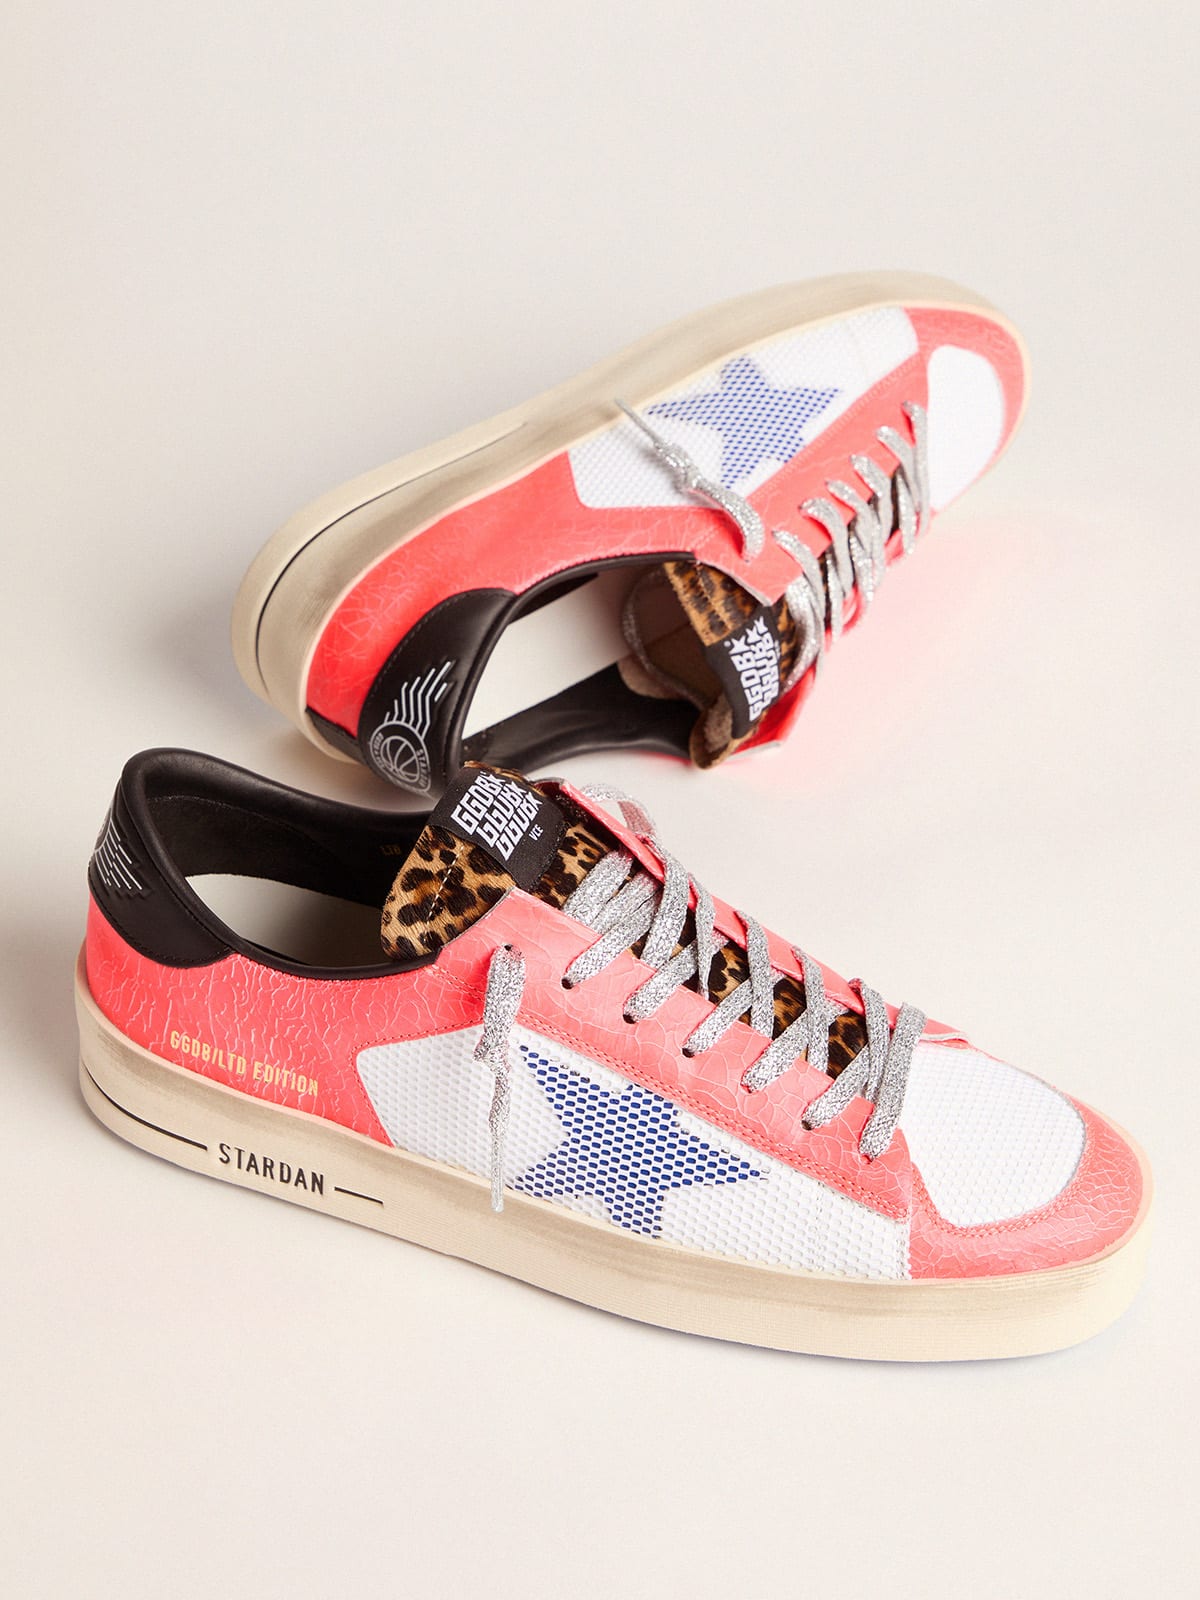 Golden Goose - Men’s LAB Limited Edition Stardan sneakers in craquelé leather and pony skin in 